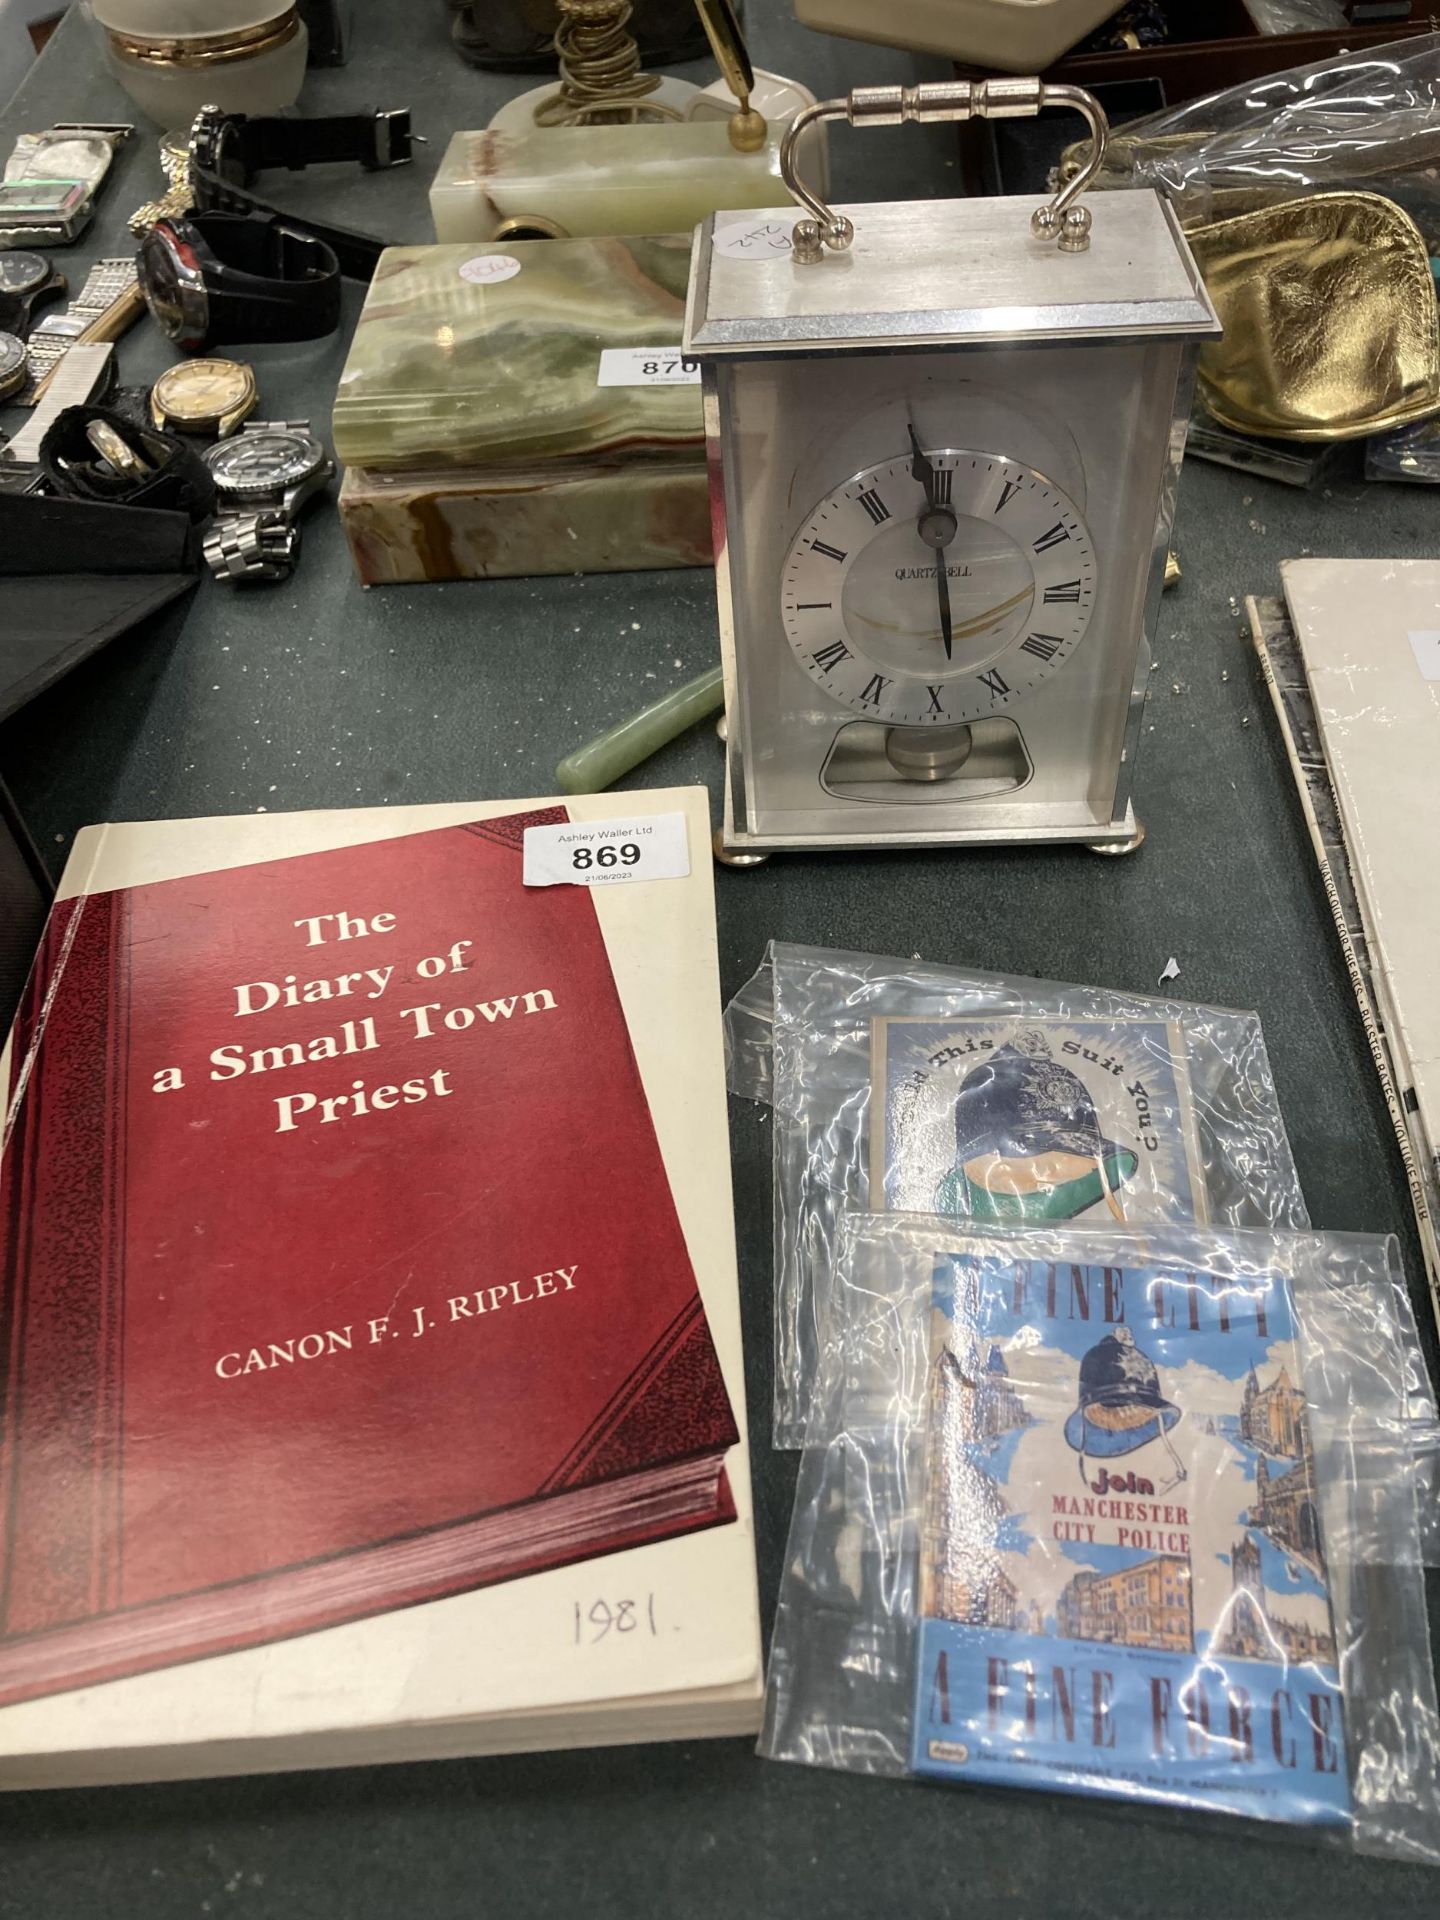 A WHITE METAL CARRIAGE CLOCK, MANCHESTER CITY POLICE MAGNETS PLUS 'THE DIARY OF A SMALL TOEN PRIEST'